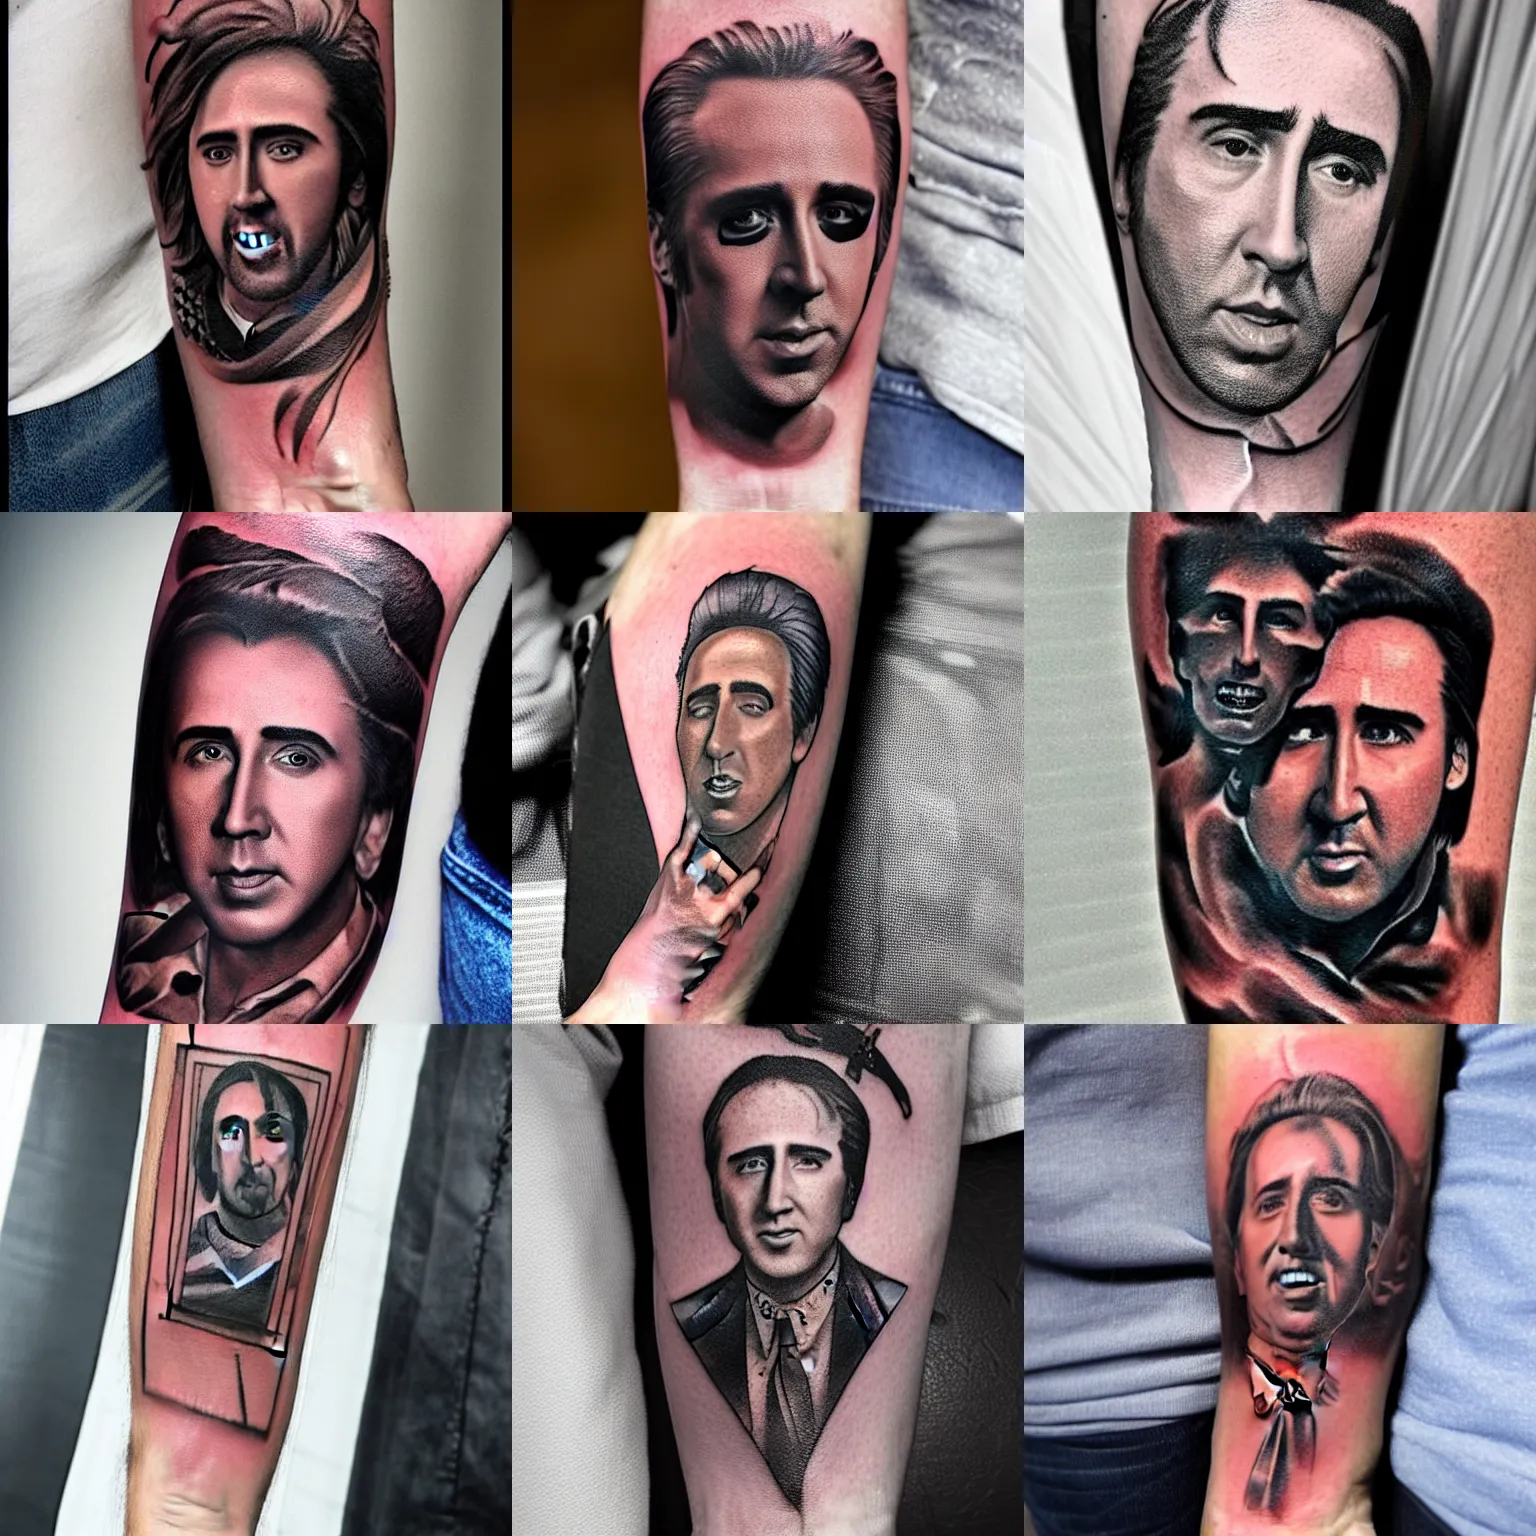 Nicolas Cage Has About 12 Tattoos but He Doesnt Often Show Them